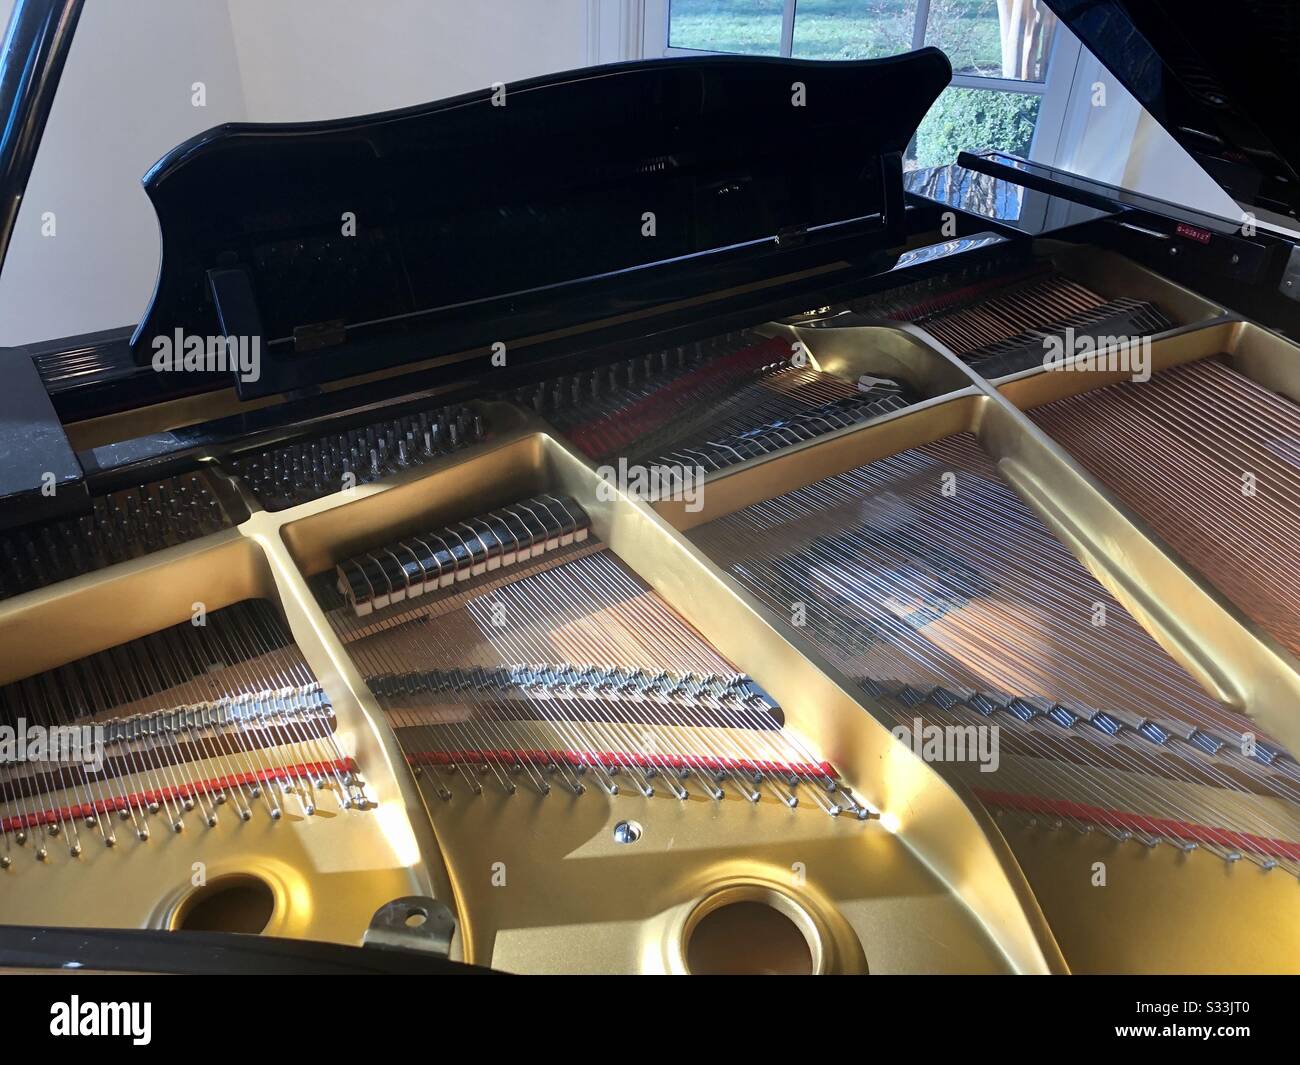 View inside a baby grand piano with the top open.  Picture includes the brass frame, front end of strings, hammers, and music stand. Stock Photo